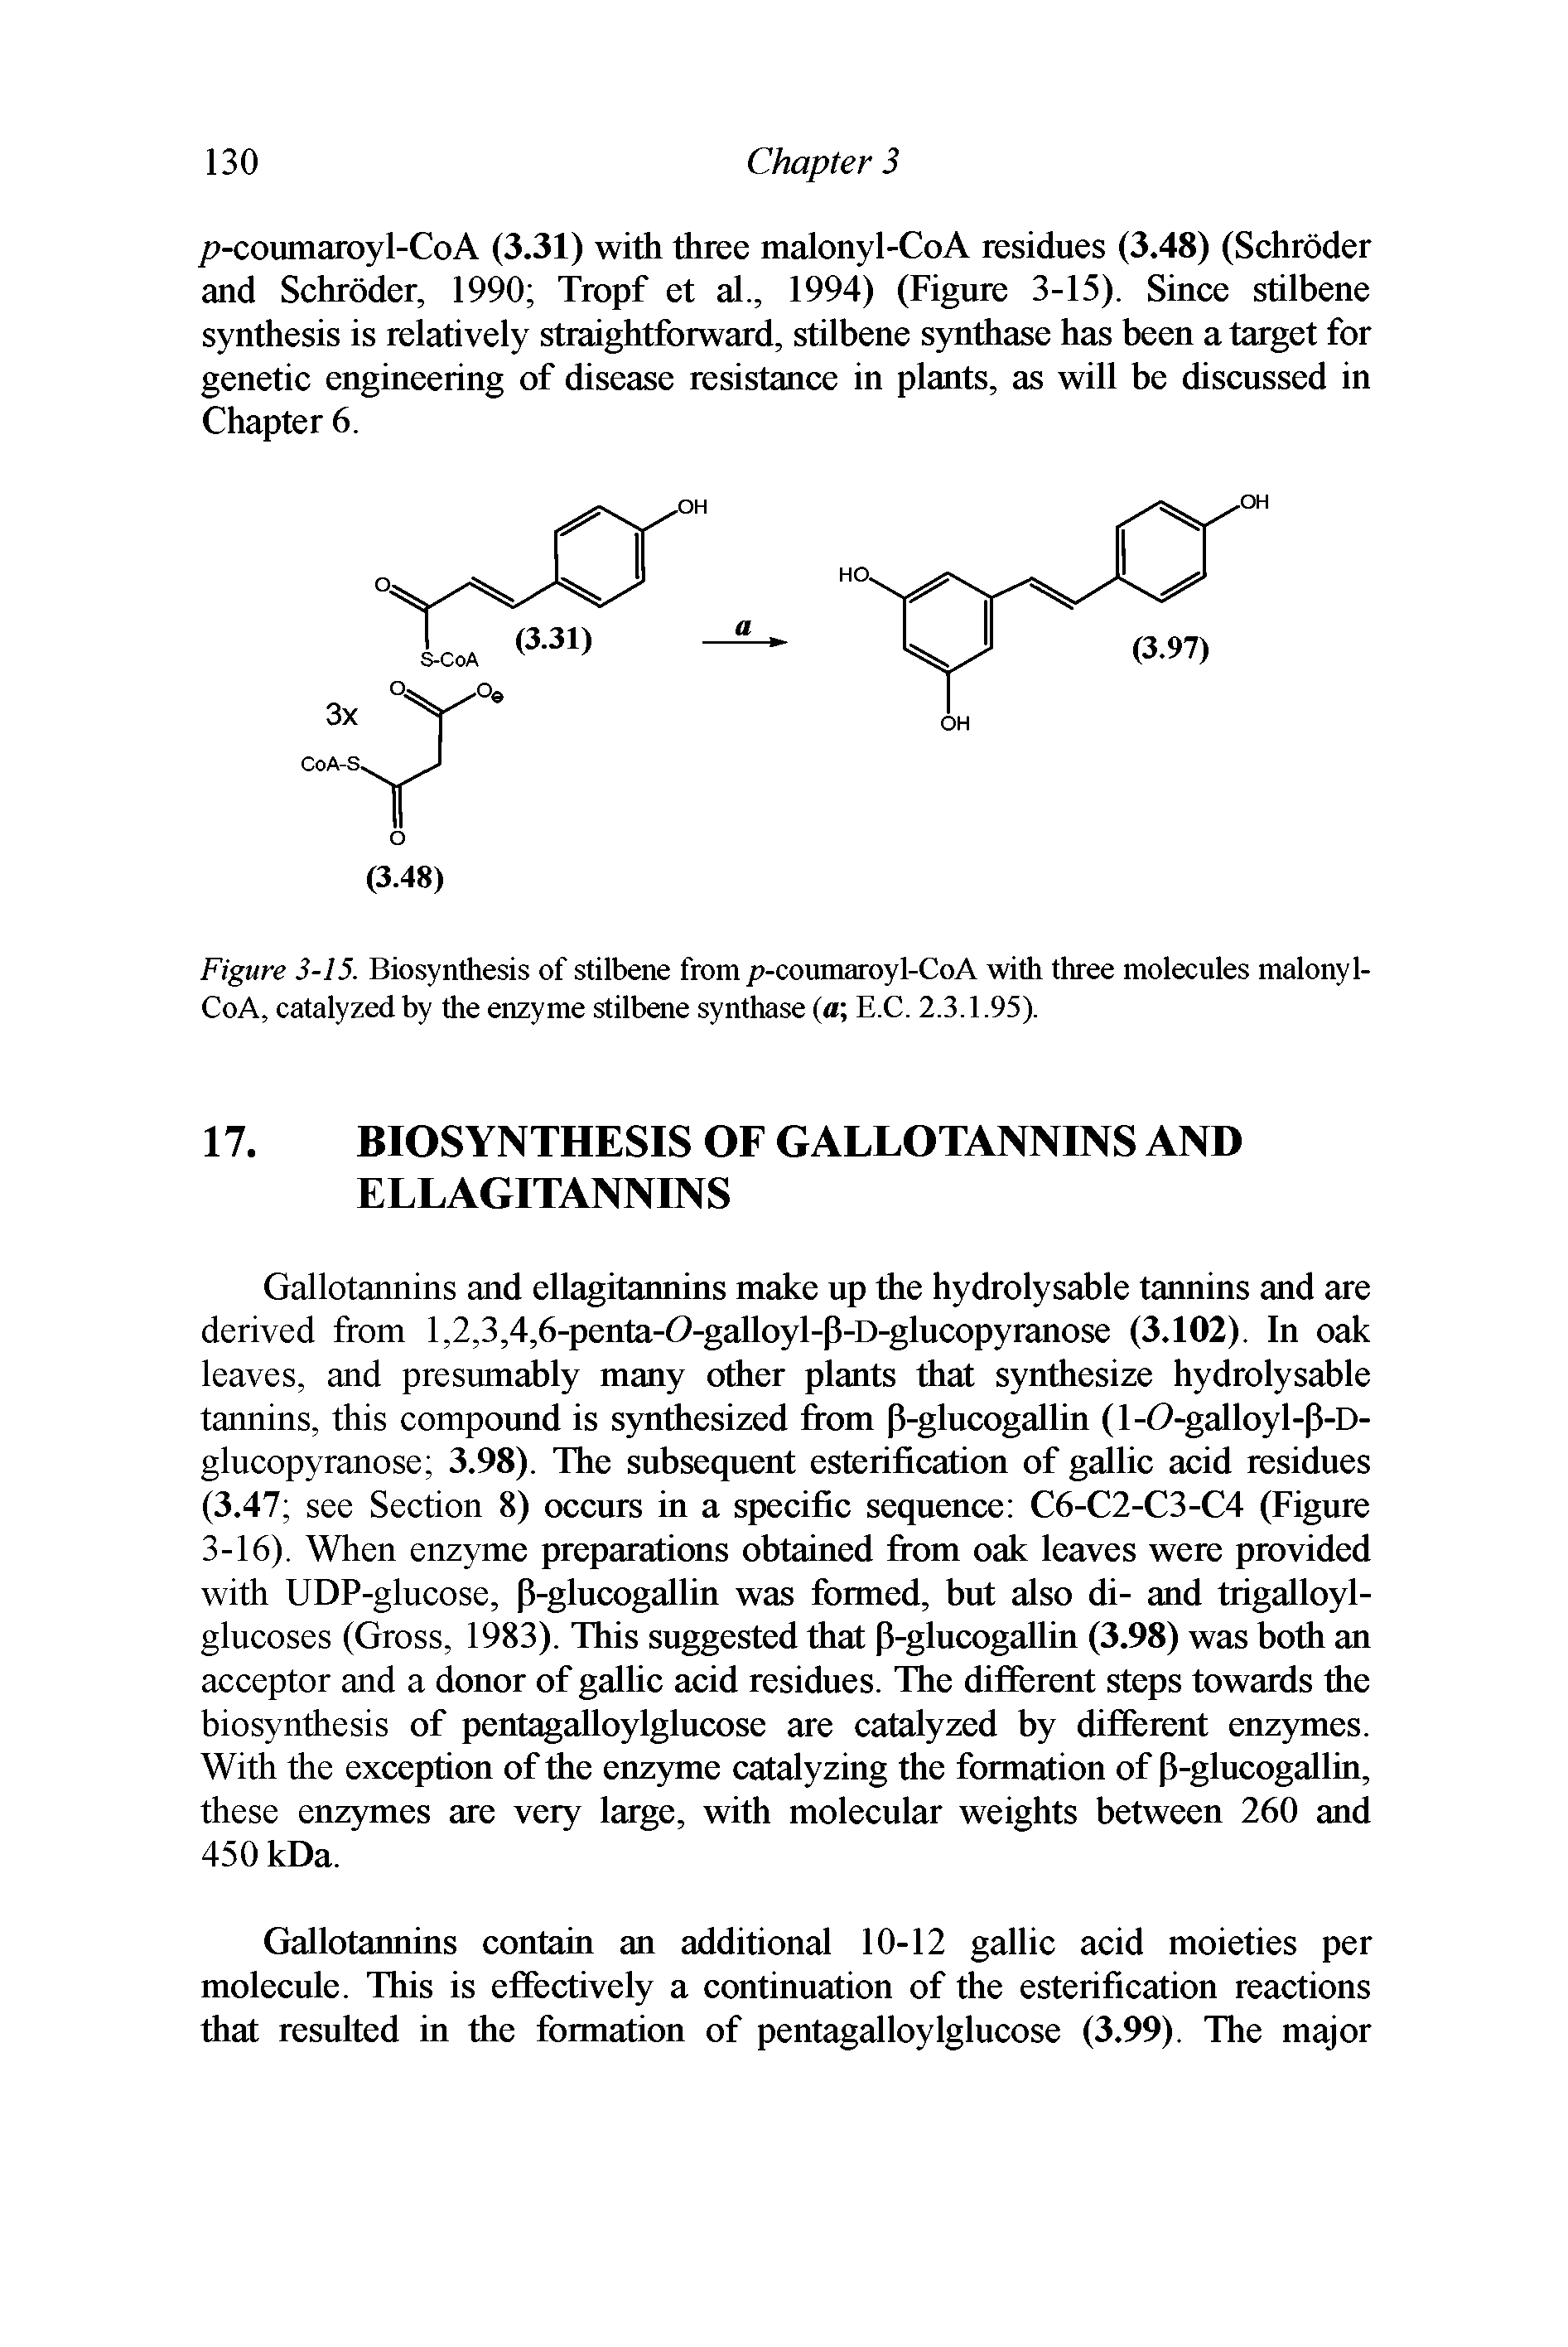 Figure 3-15. Biosynthesis of stilbene from p-coumaroyl-CoA with three molecules malonyl-CoA, catalyzed by the enzyme stilbene synthase (a E.C. 2.3.1.95).